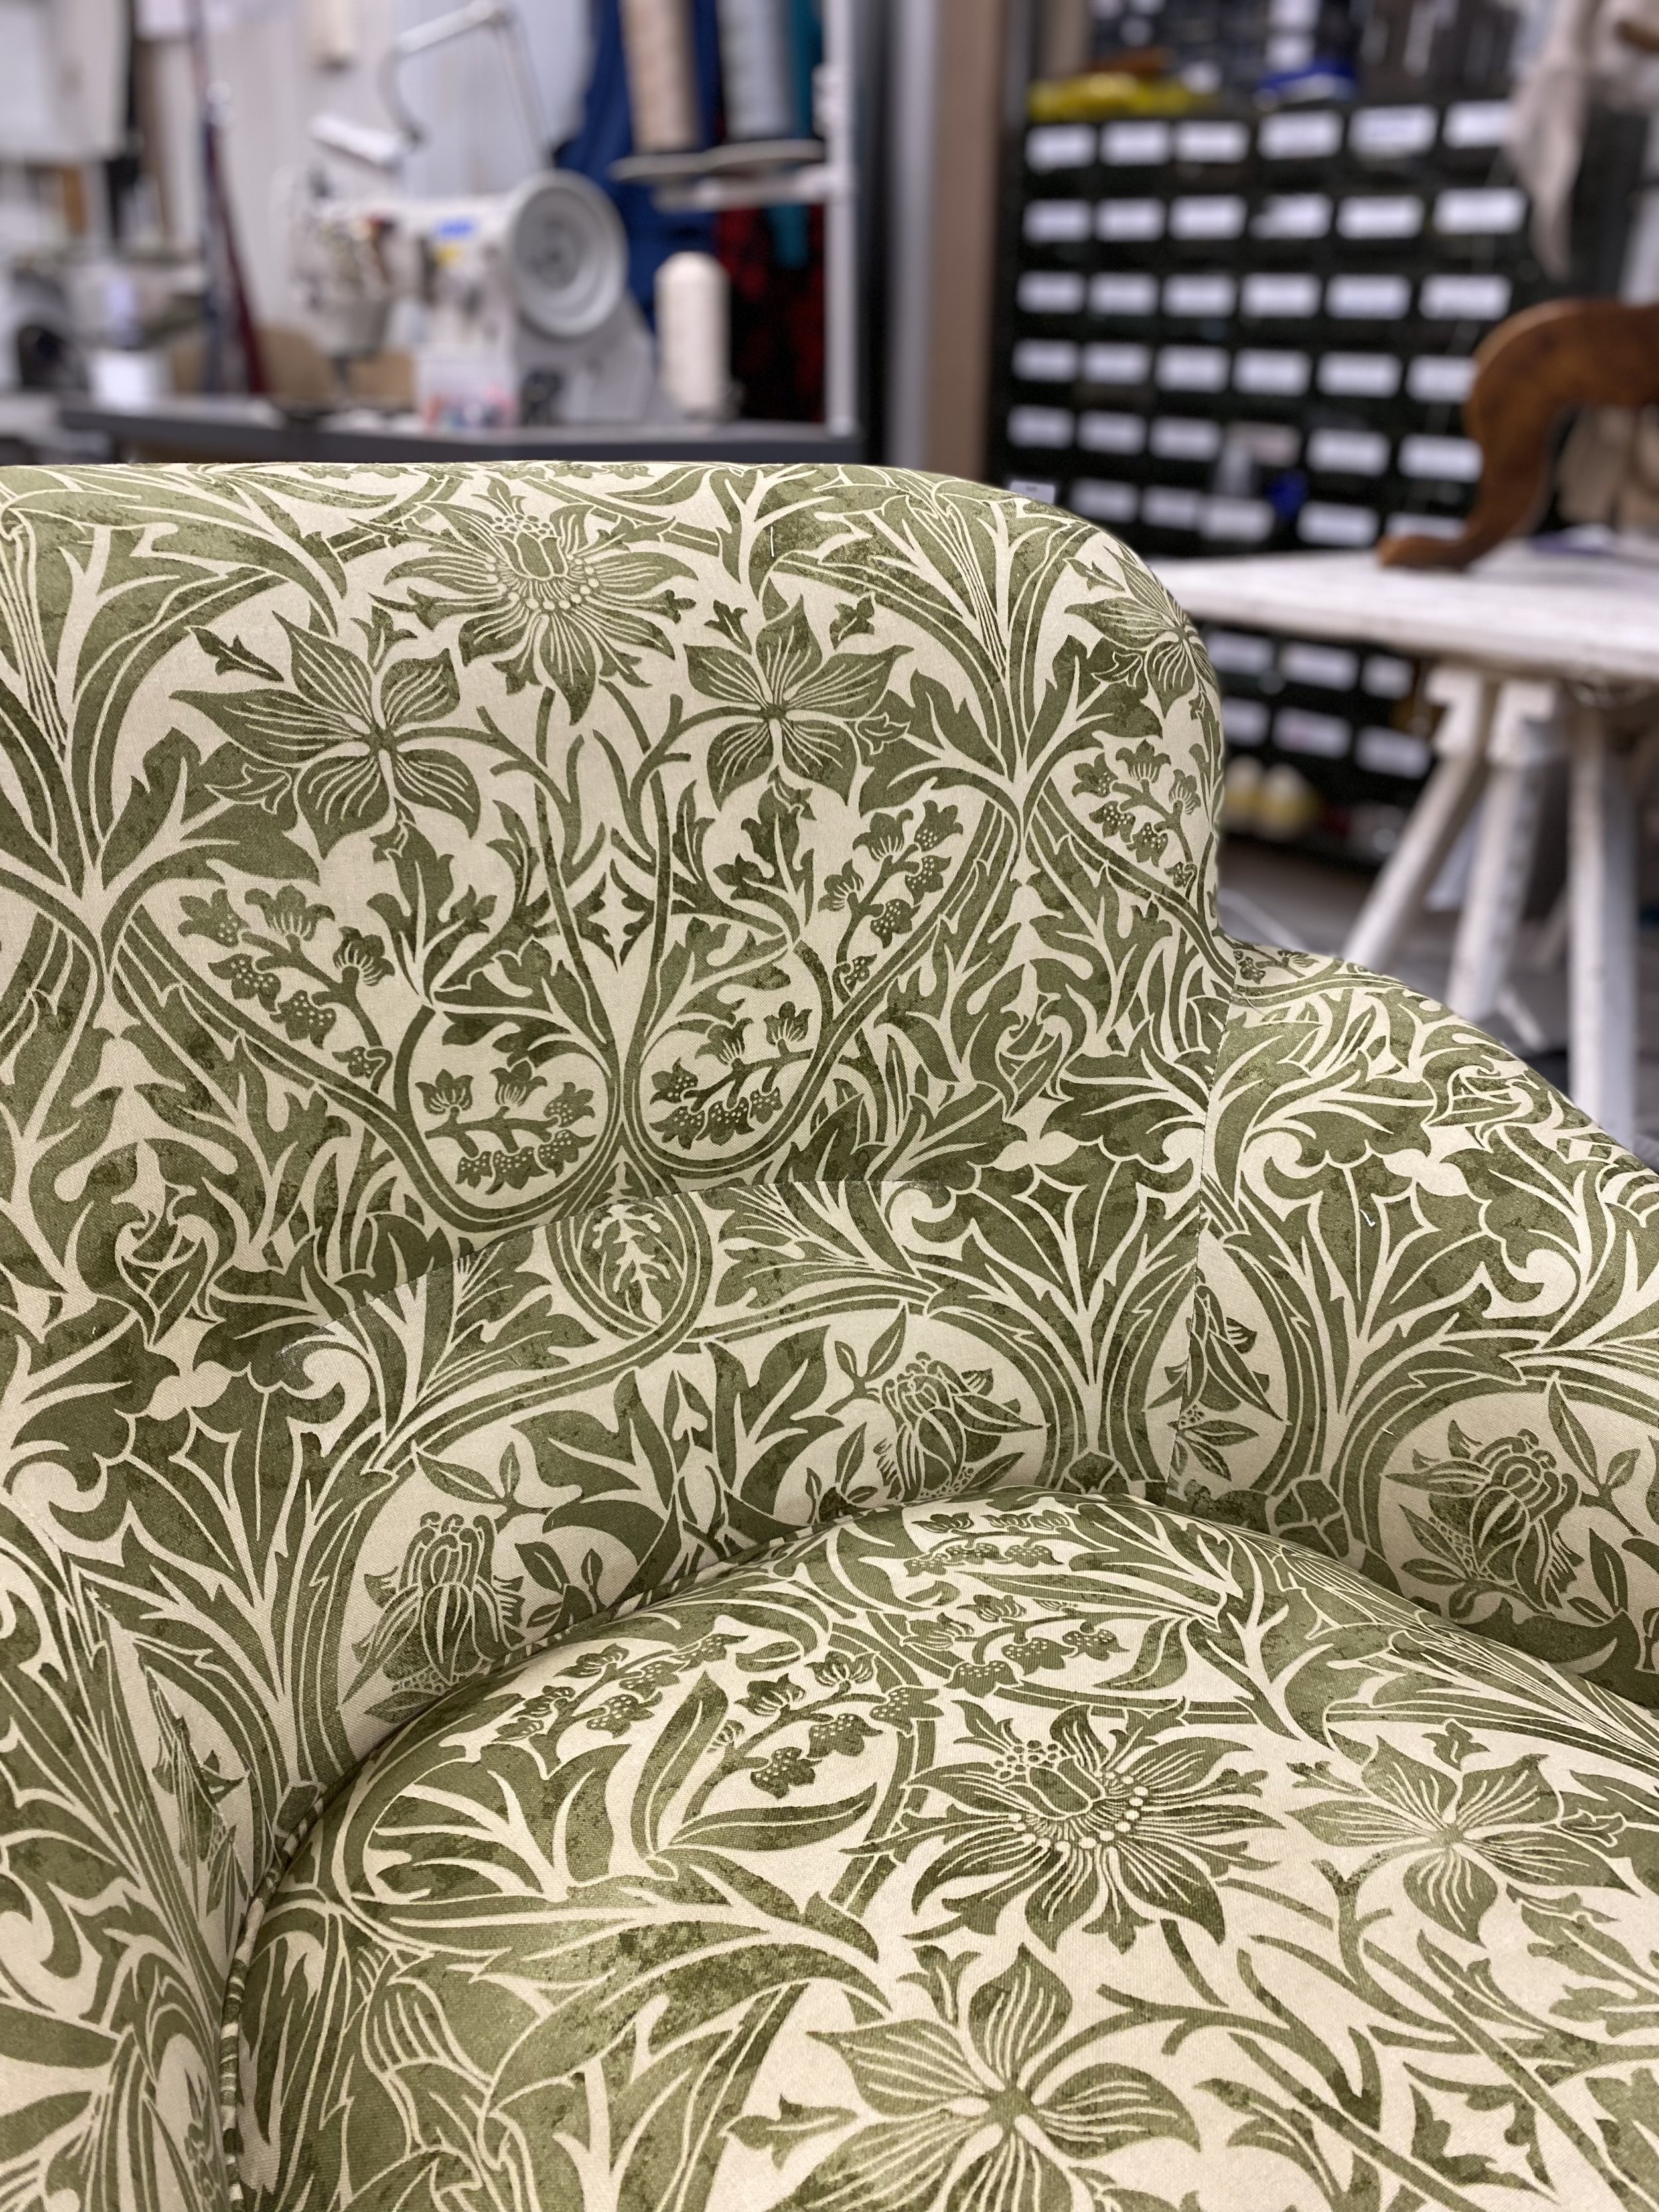 Traditionally reupholstered armchair in William Morris print fabric